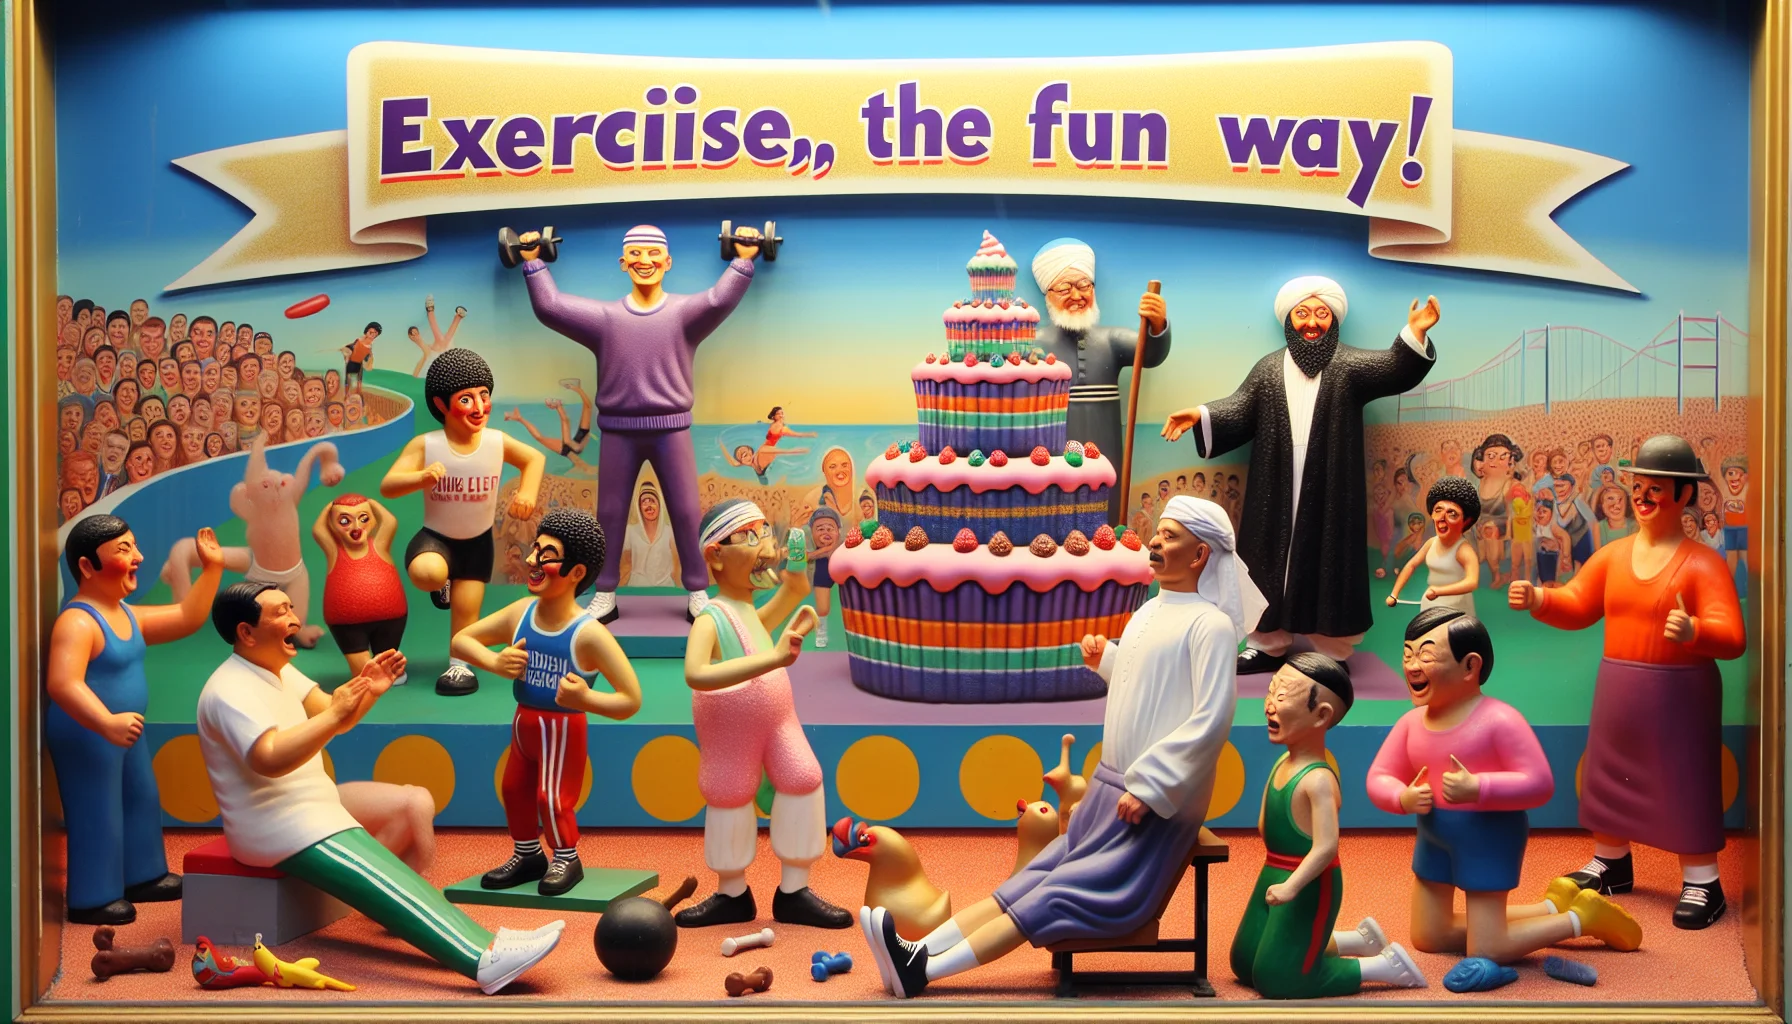 An amusingly whimsical encouragement to exercise, depicted vividly through a lively scene of a gym filled with people of various descents and genders. In the center stage, a Middle-Eastern woman can be seen enthusiastically lifting a barbell sculpted to look like a row of cupcakes, while a Caucasian man next to her is trying to do sit-ups but is humorously tripped up by his own shoelaces. On the other side, an East Asian man is seen doing jumping jacks while balancing a rubber chicken on his head. A humorous banner sings above: 'Exercise, the fun way!'